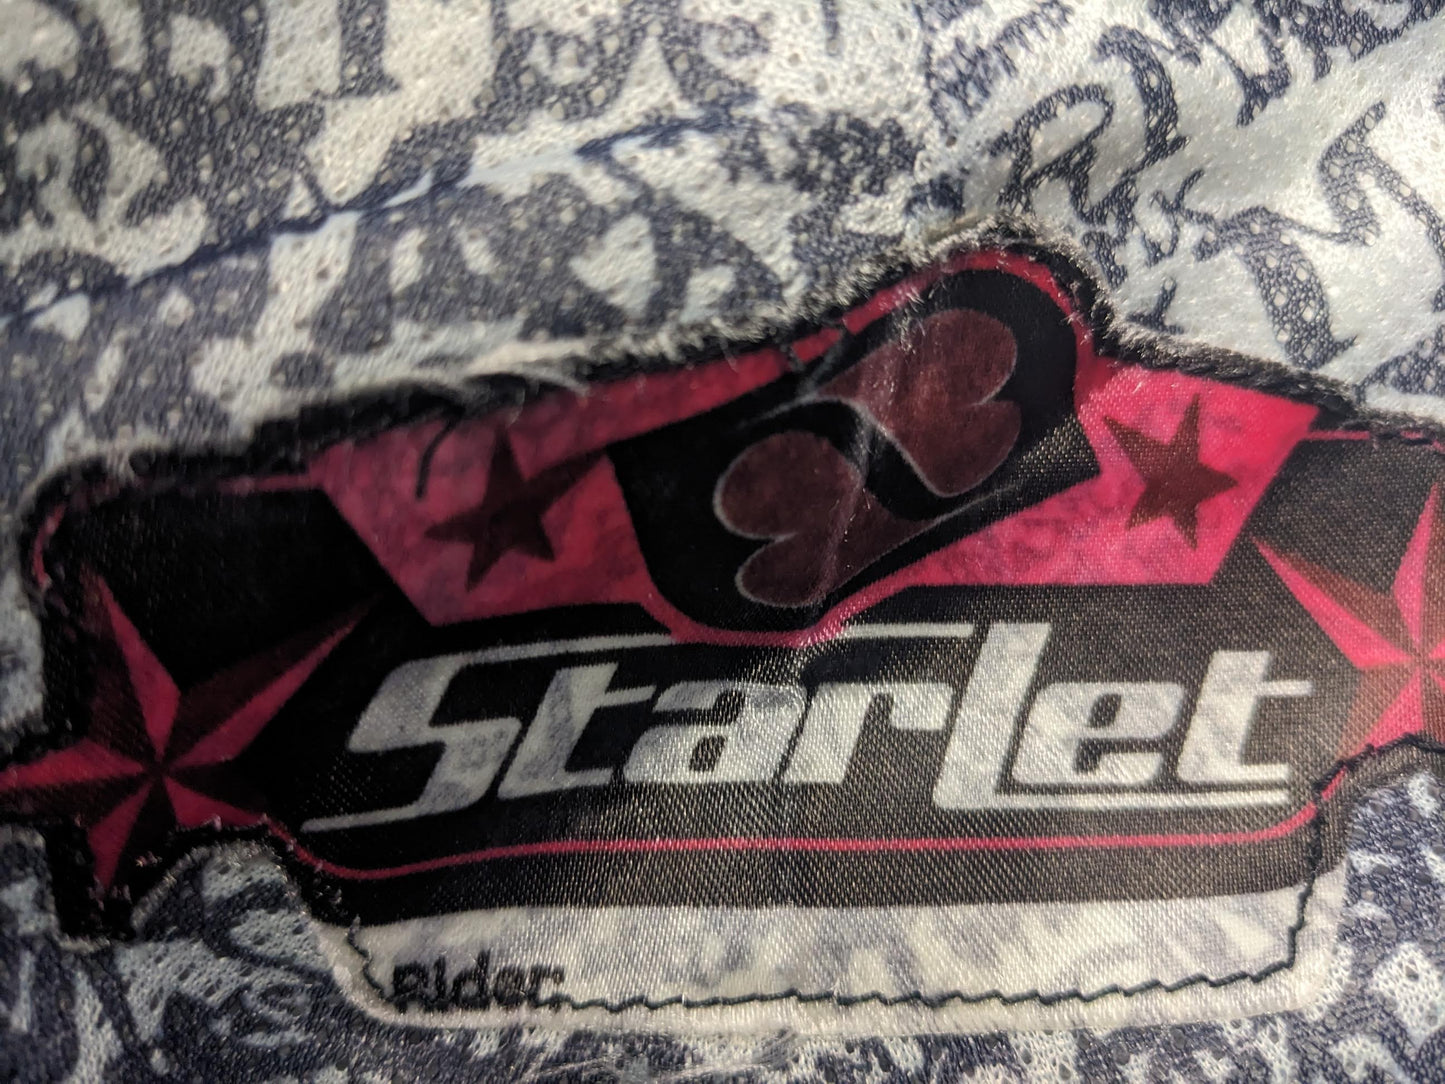 MSR Starlet Girl's MX Motocross Racing Pants Size 9/10 Waist 30 in Color Gray Condition Used